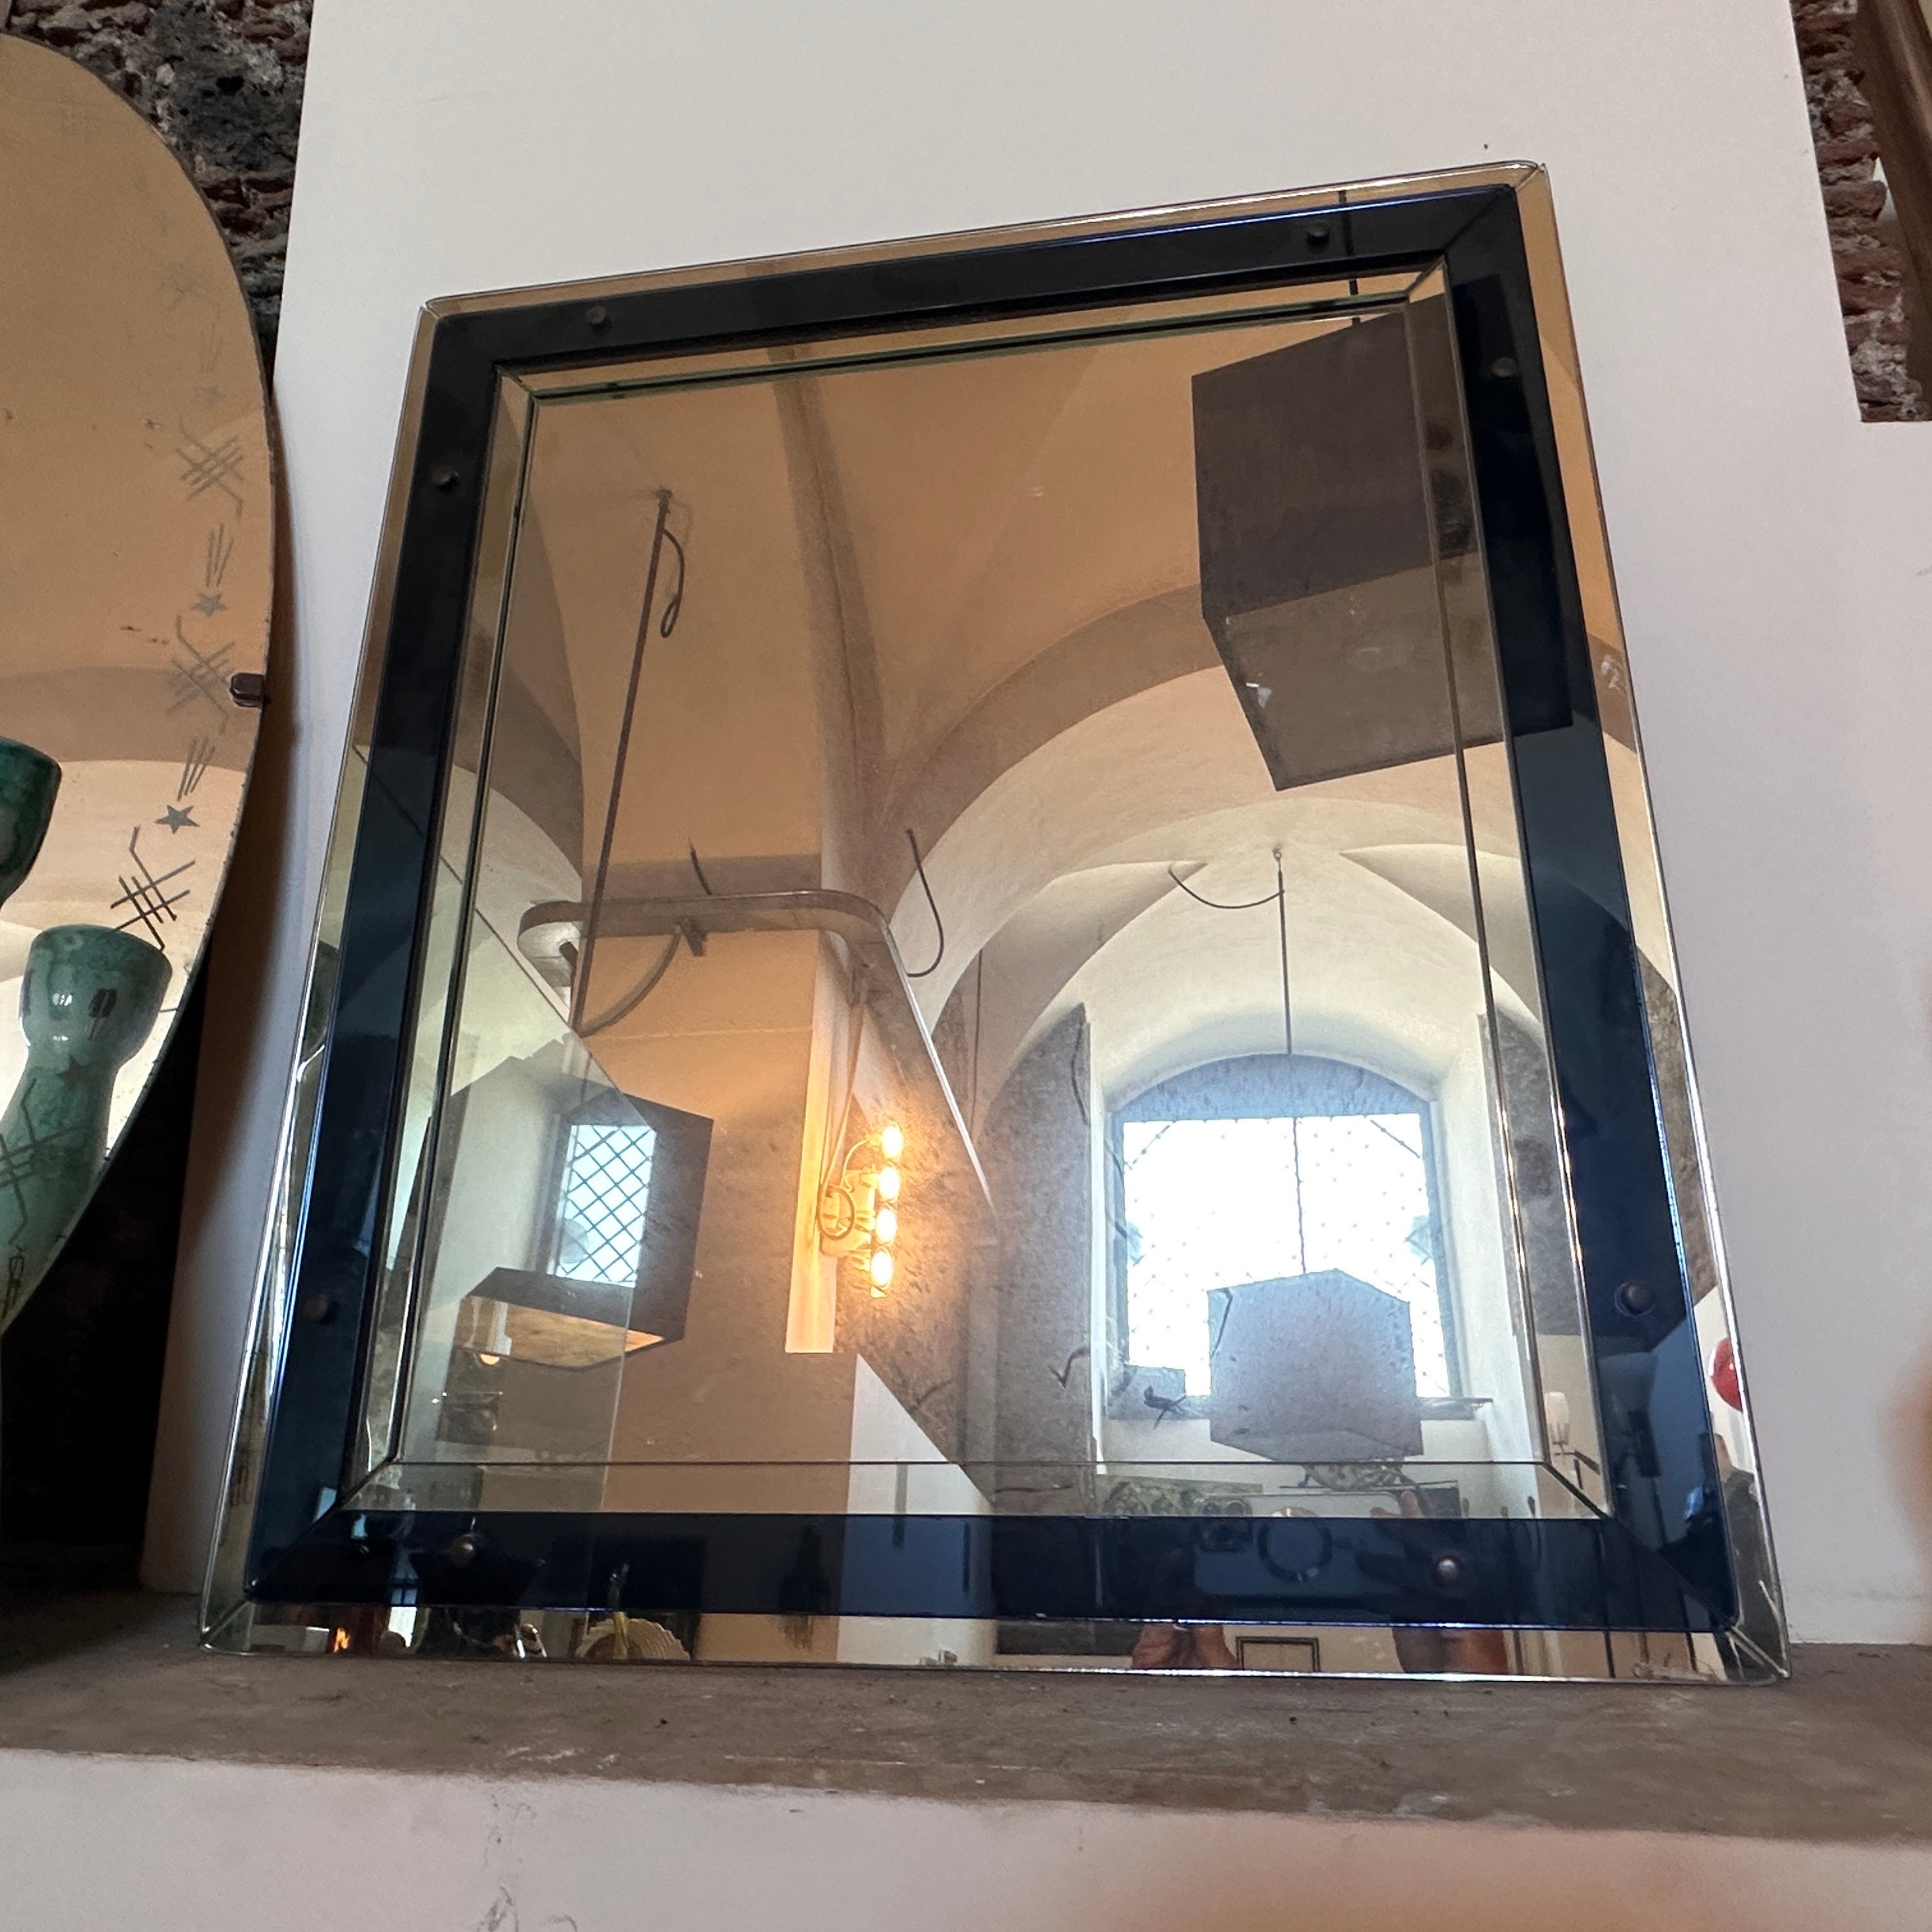 A Blue Glass RectangularWall Mirror by Cristal Arte is a stylish and iconic piece of Italian design from the mid-20th century. The mirror frame is made of blue glass, which was a popular choice for Space Age design in the 1970s. The blue glass has a